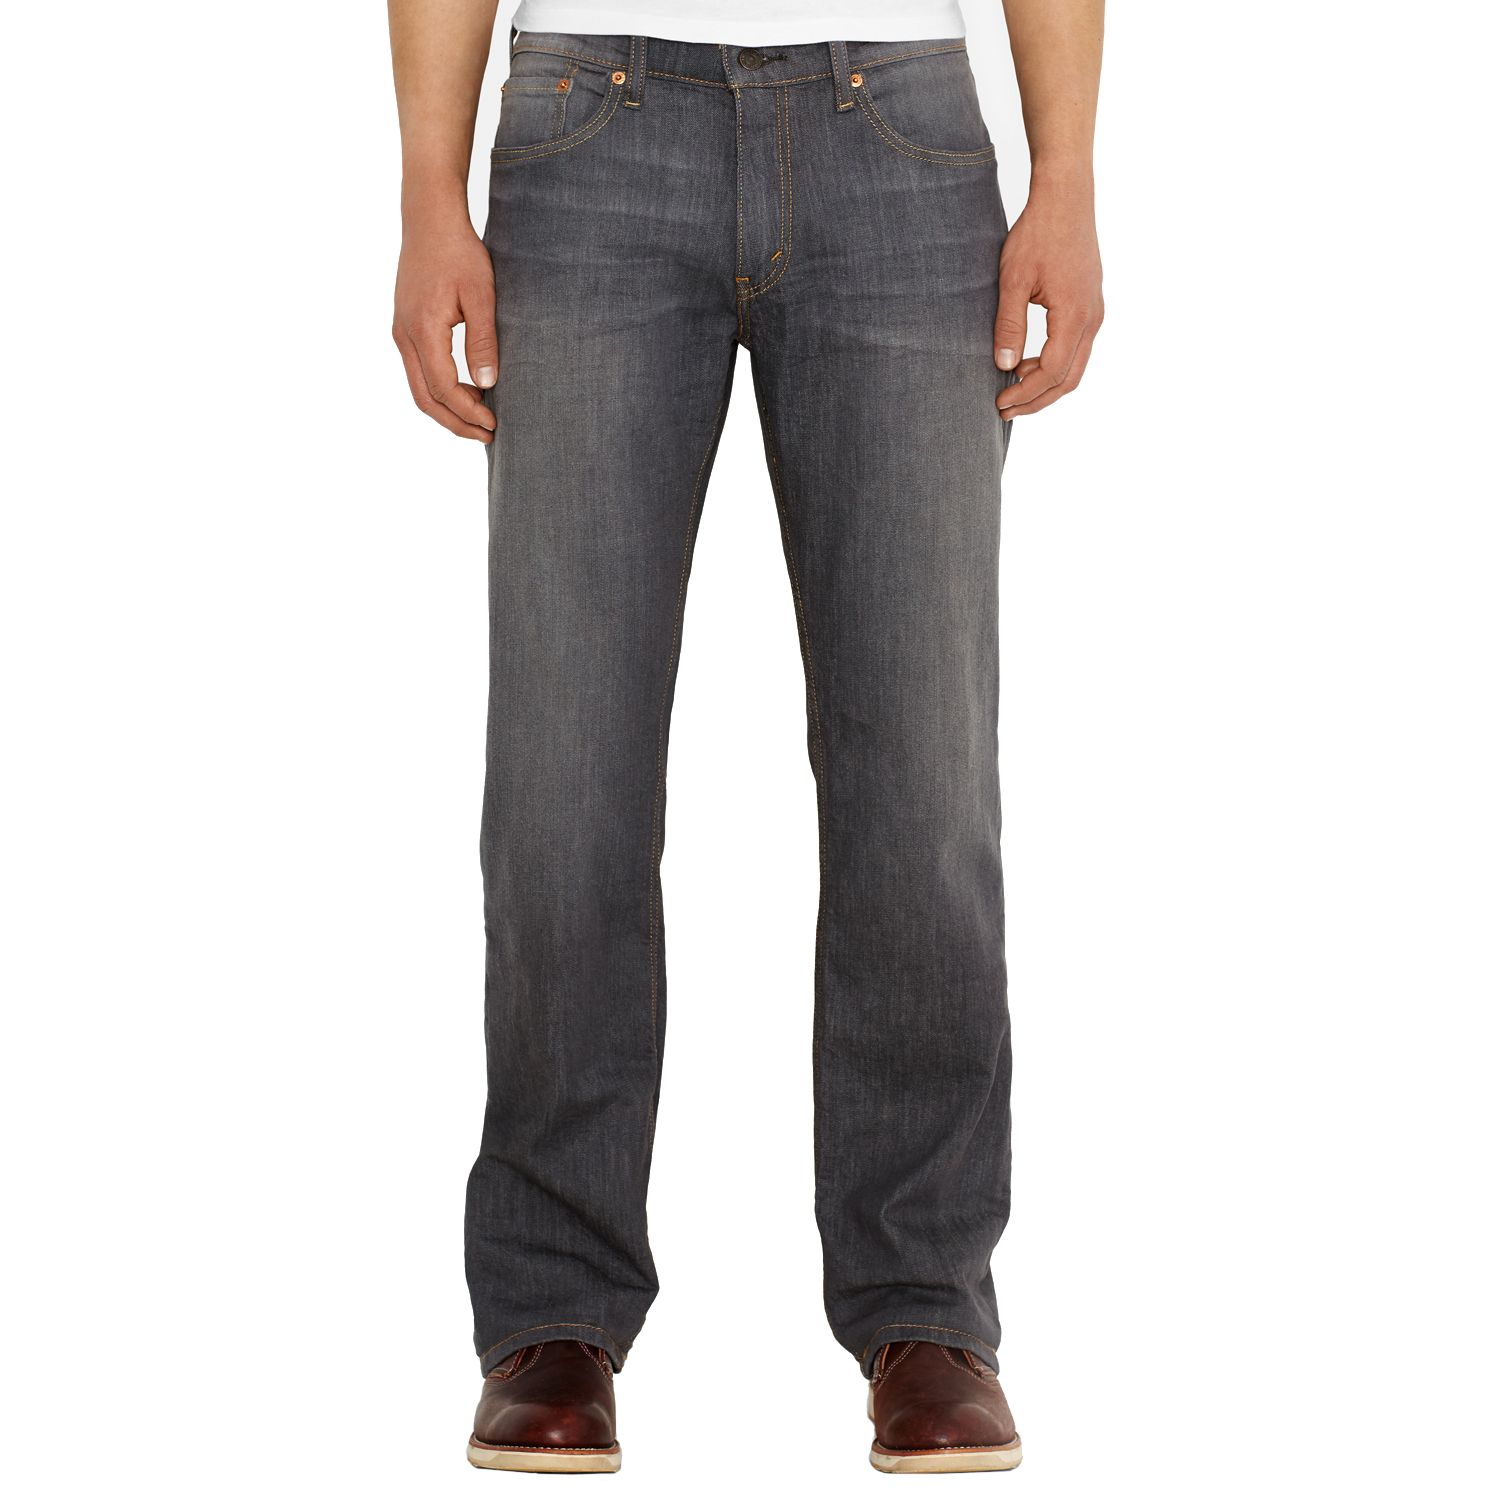 559™ Relaxed Straight Fit Jeans - Men